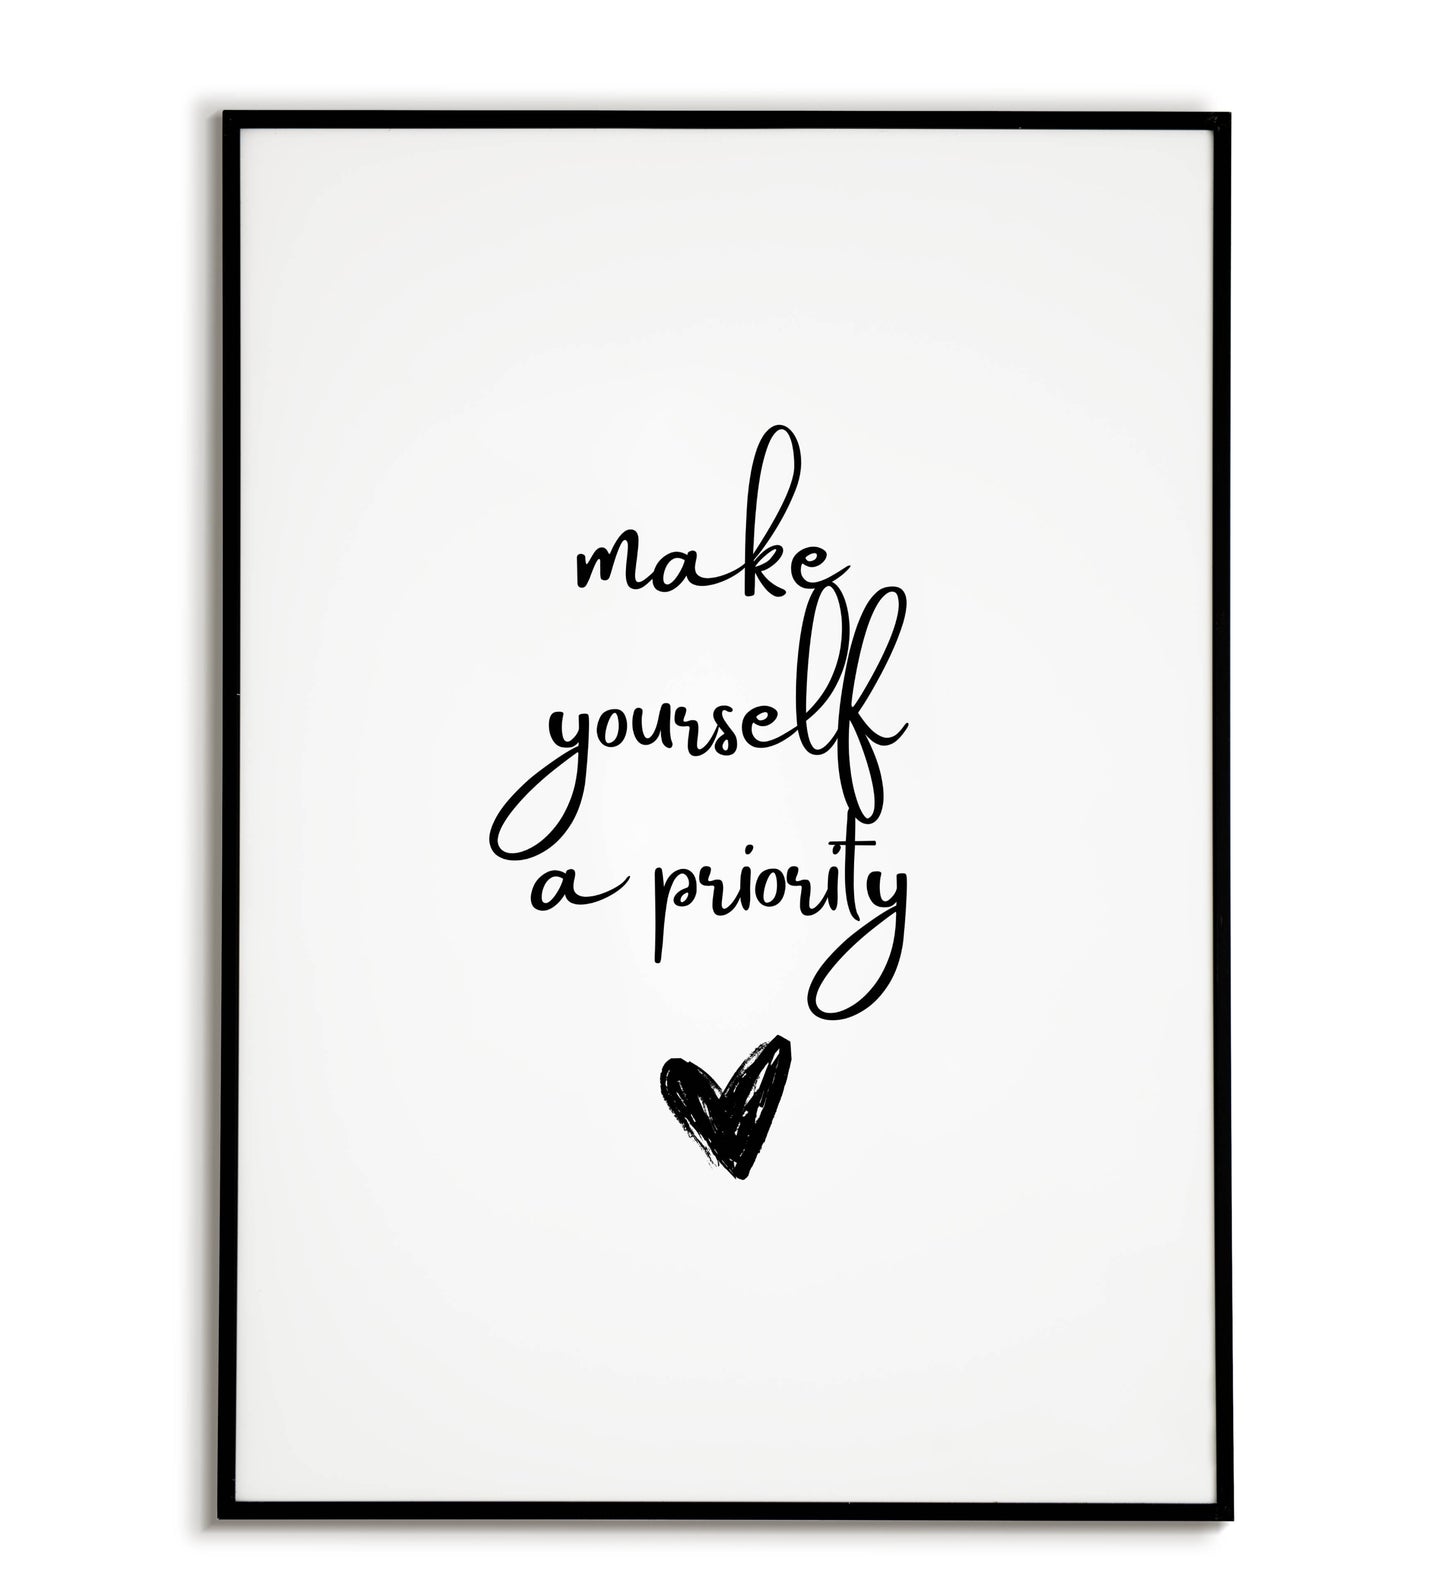 Make yourself a priority - Printable Wall Art / Poster. Download this design to enhance your space.	